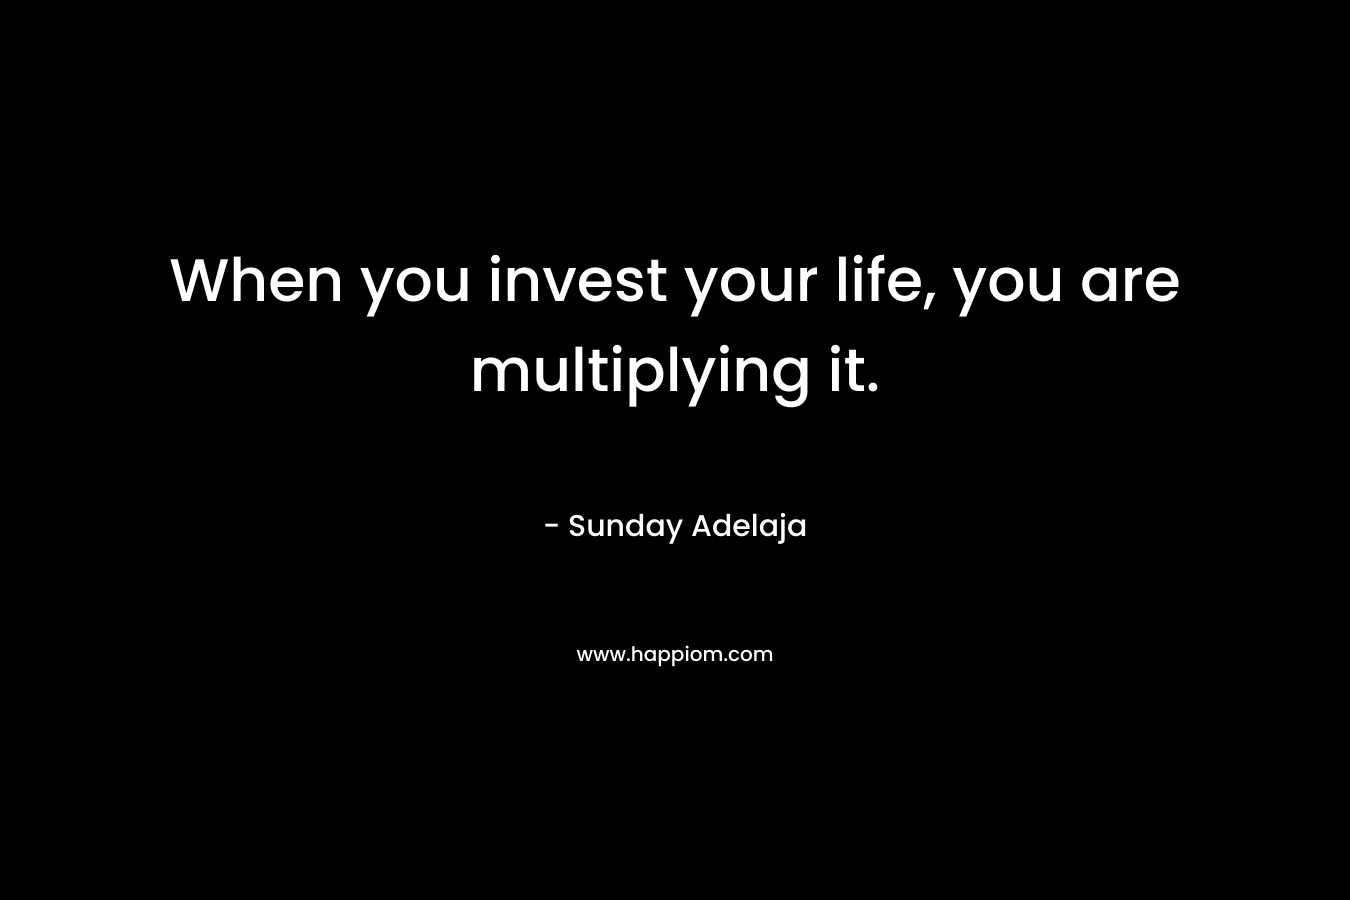 When you invest your life, you are multiplying it.